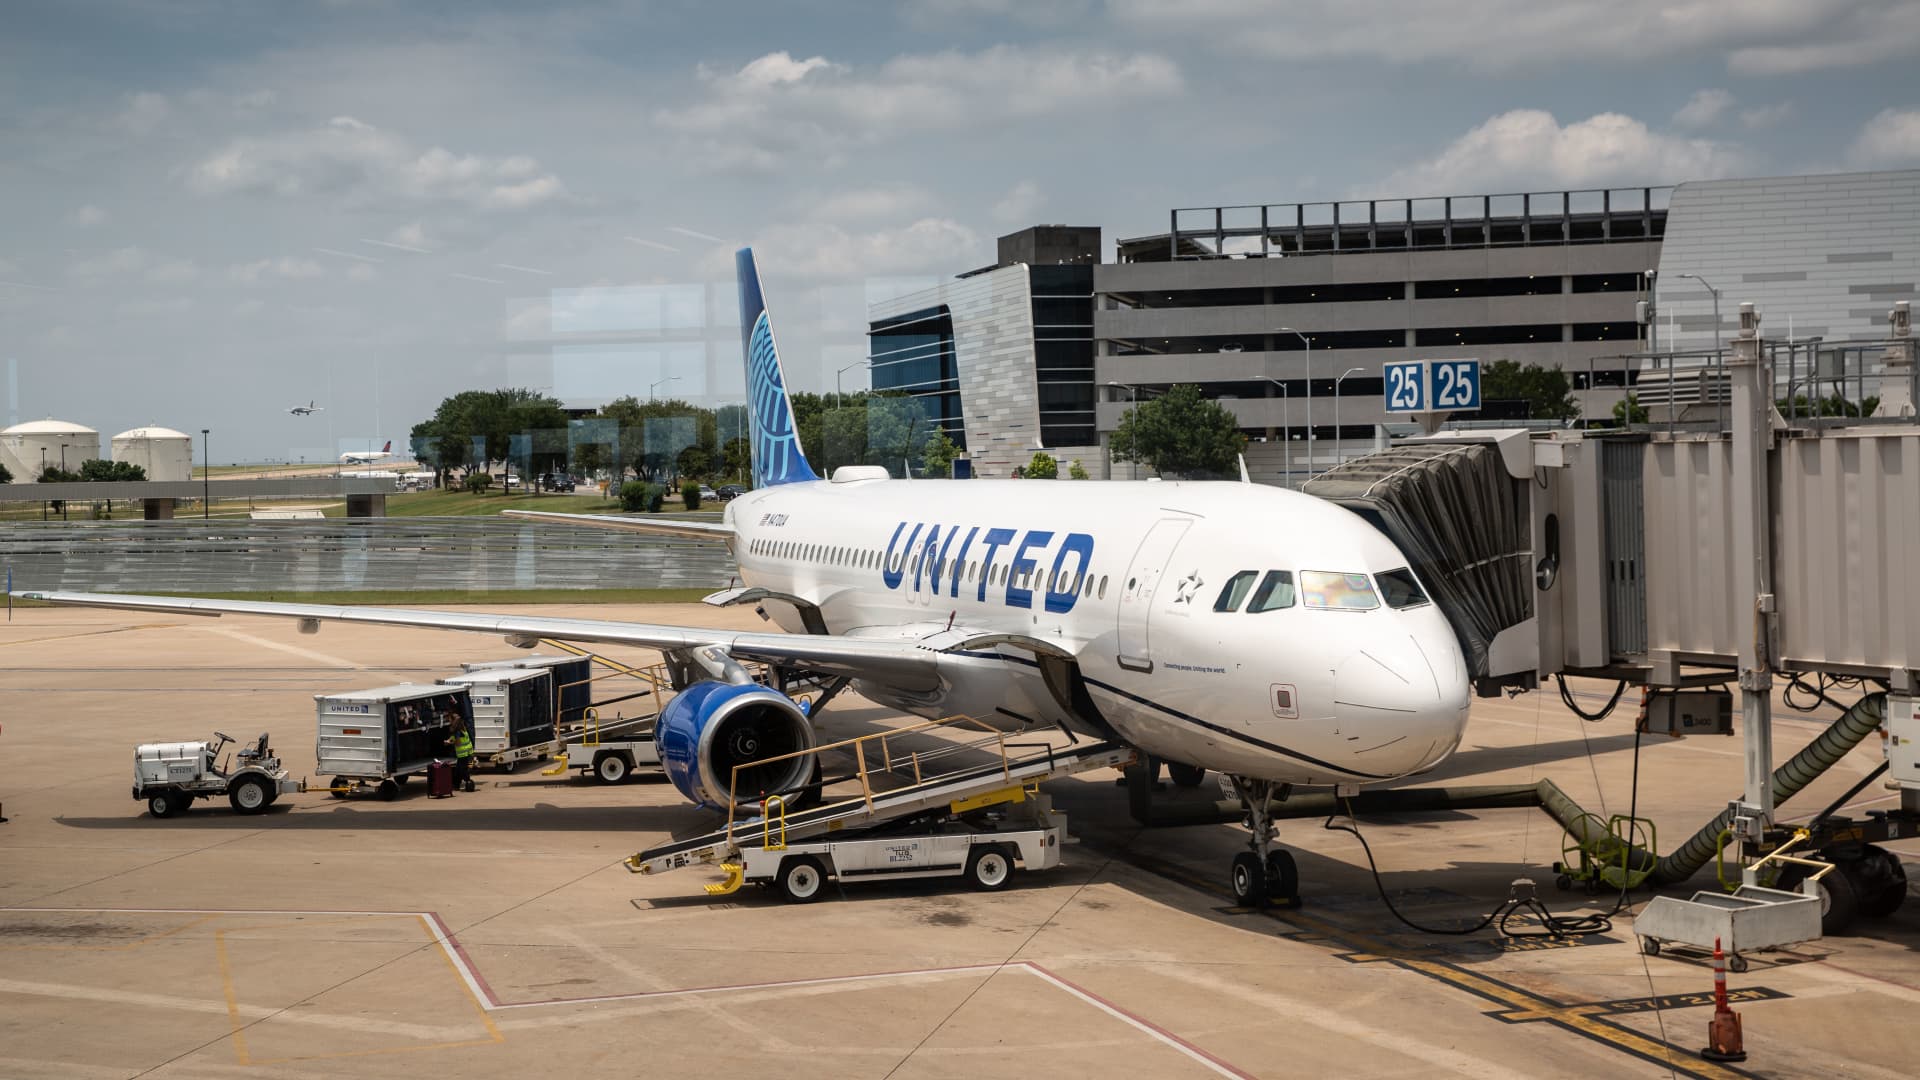 United Airlines, pilots’ union to renegotiate contract after last deal faced opposition